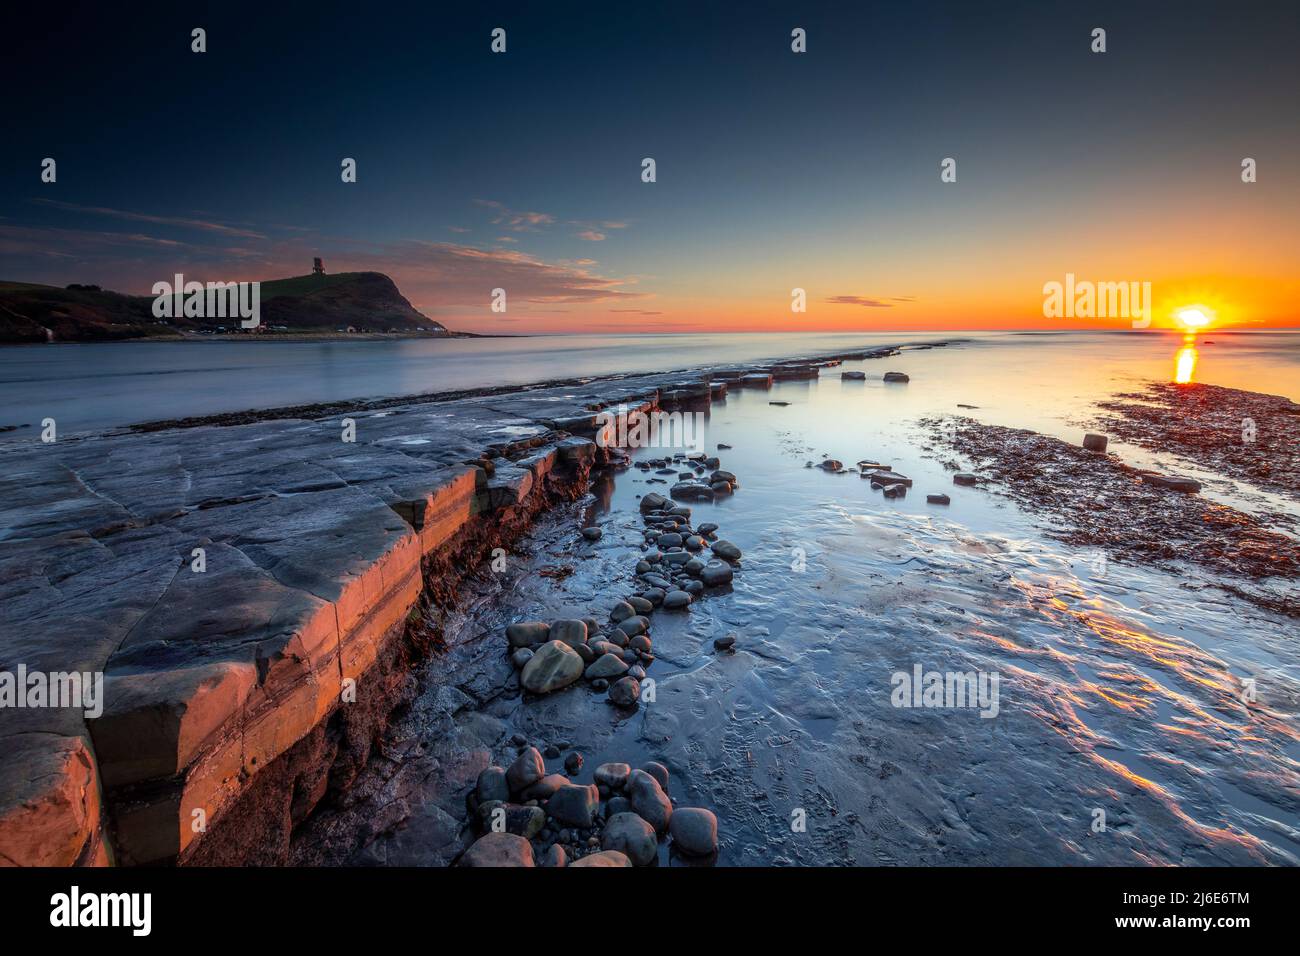 Winter Sunset in Kimmeridge Bay, Dorset taken  on December 27th 2019 at 4pm in the afternoon when all the Christmas crowds had gone home. Stock Photo